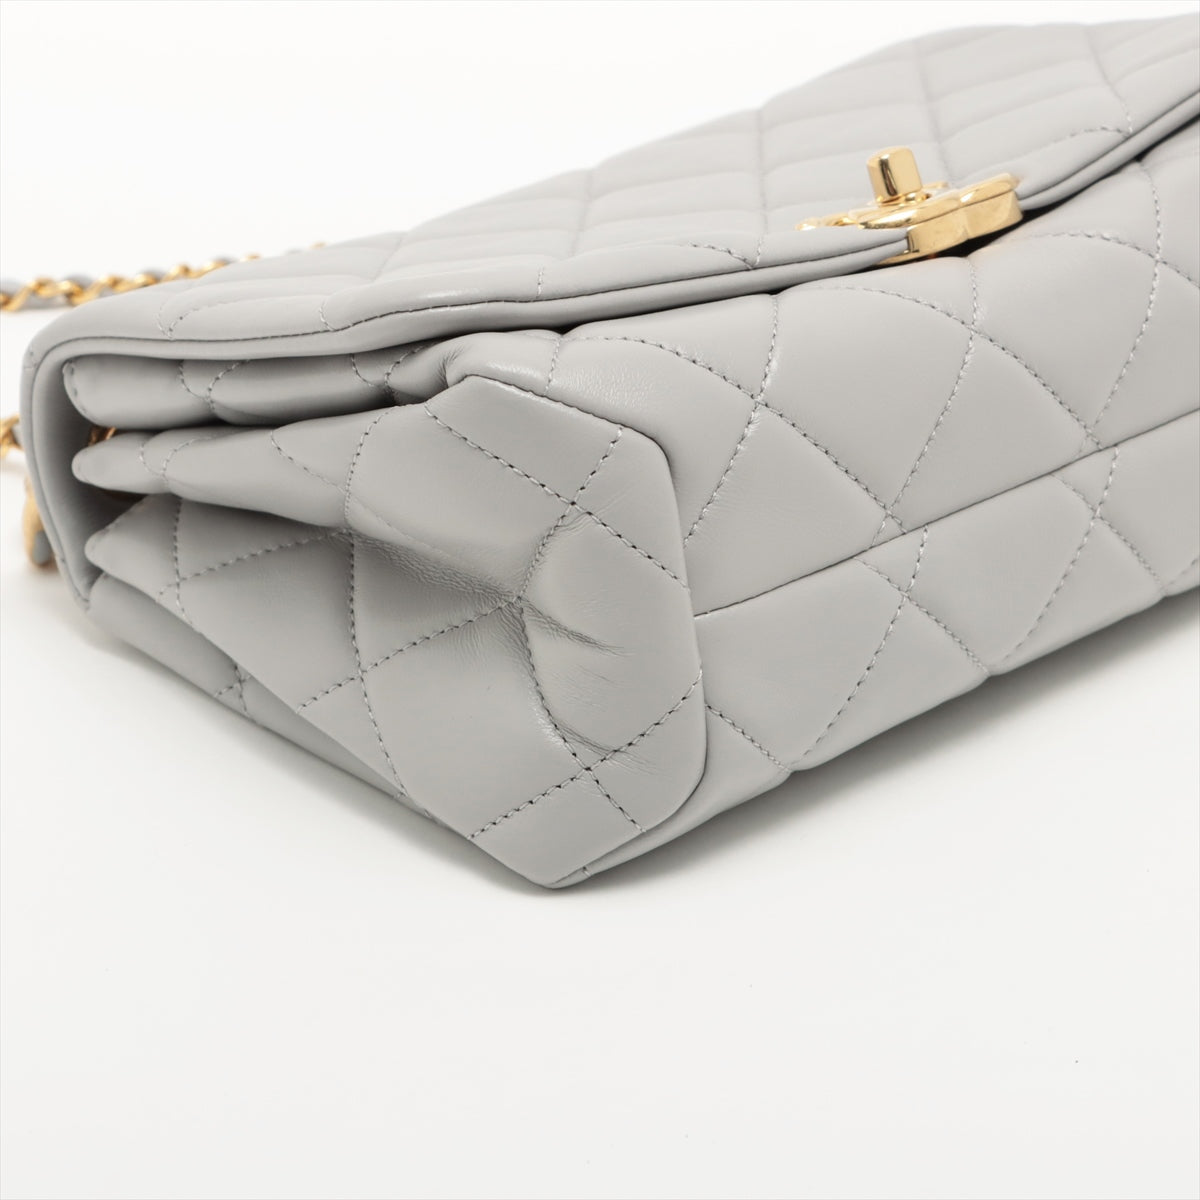 Chanel Matelasse Lambskin Chain shoulder bag Grey Gold Metal fittings There is an IC chip